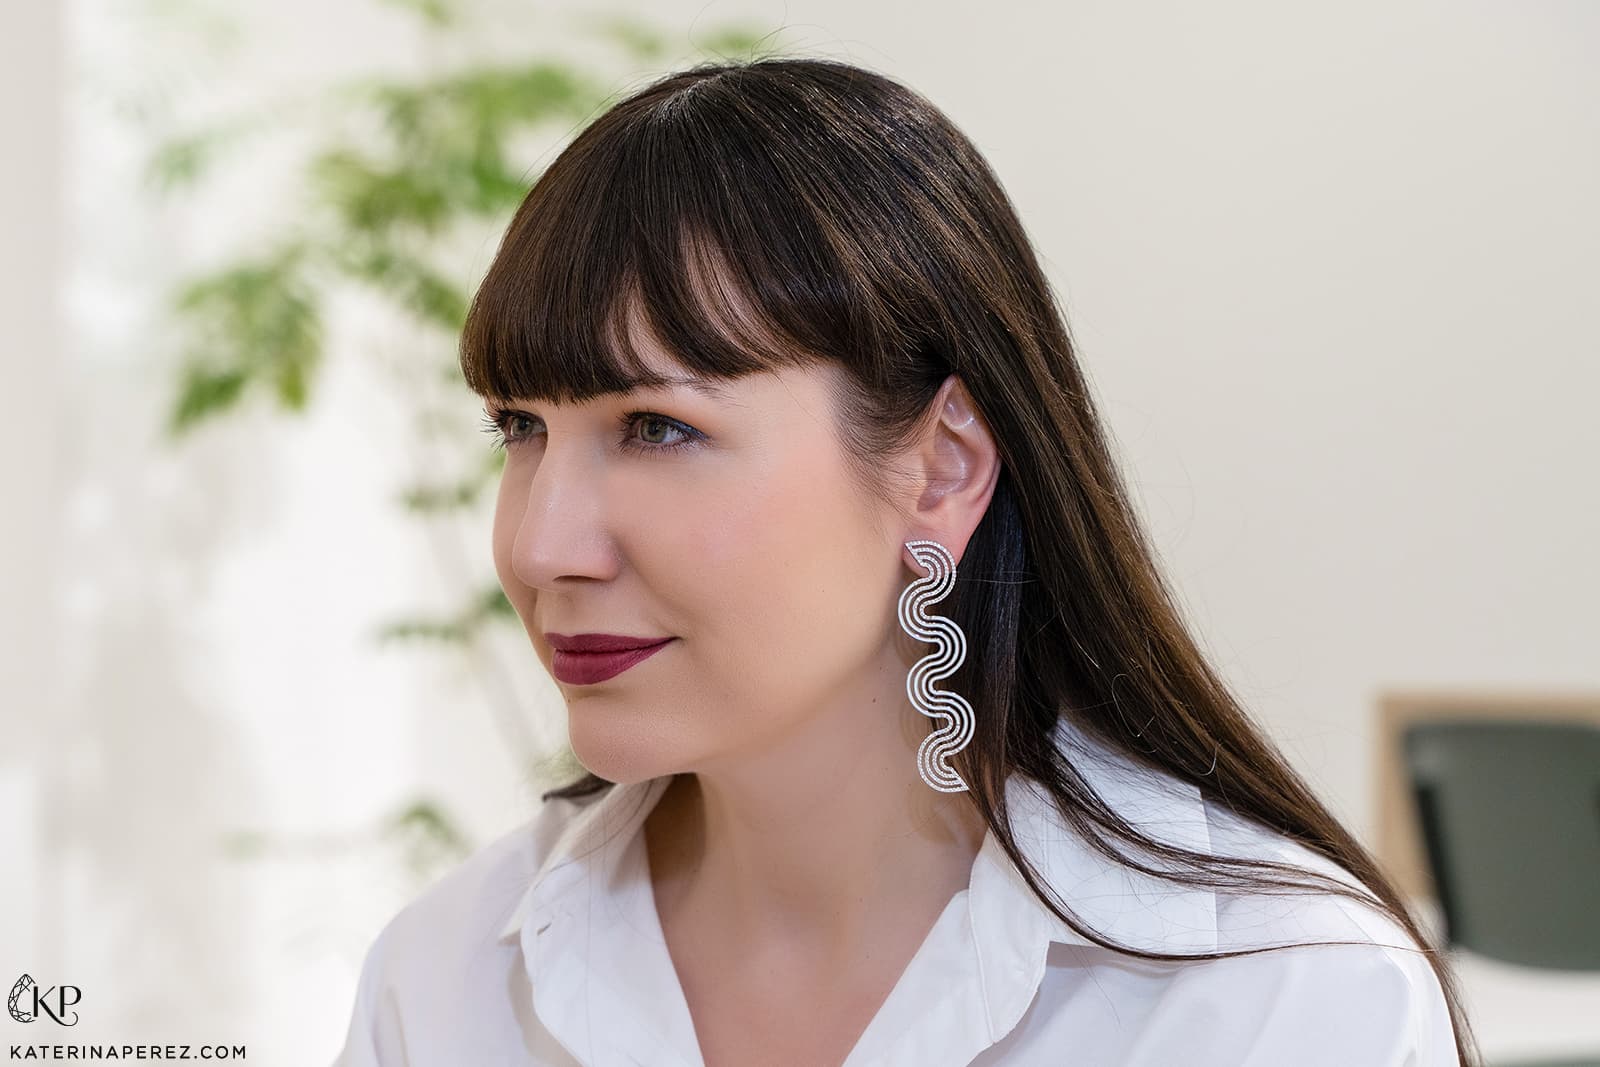 Katerina Perez wears the State Property Aldrin earrings with diamonds in 18k white gold